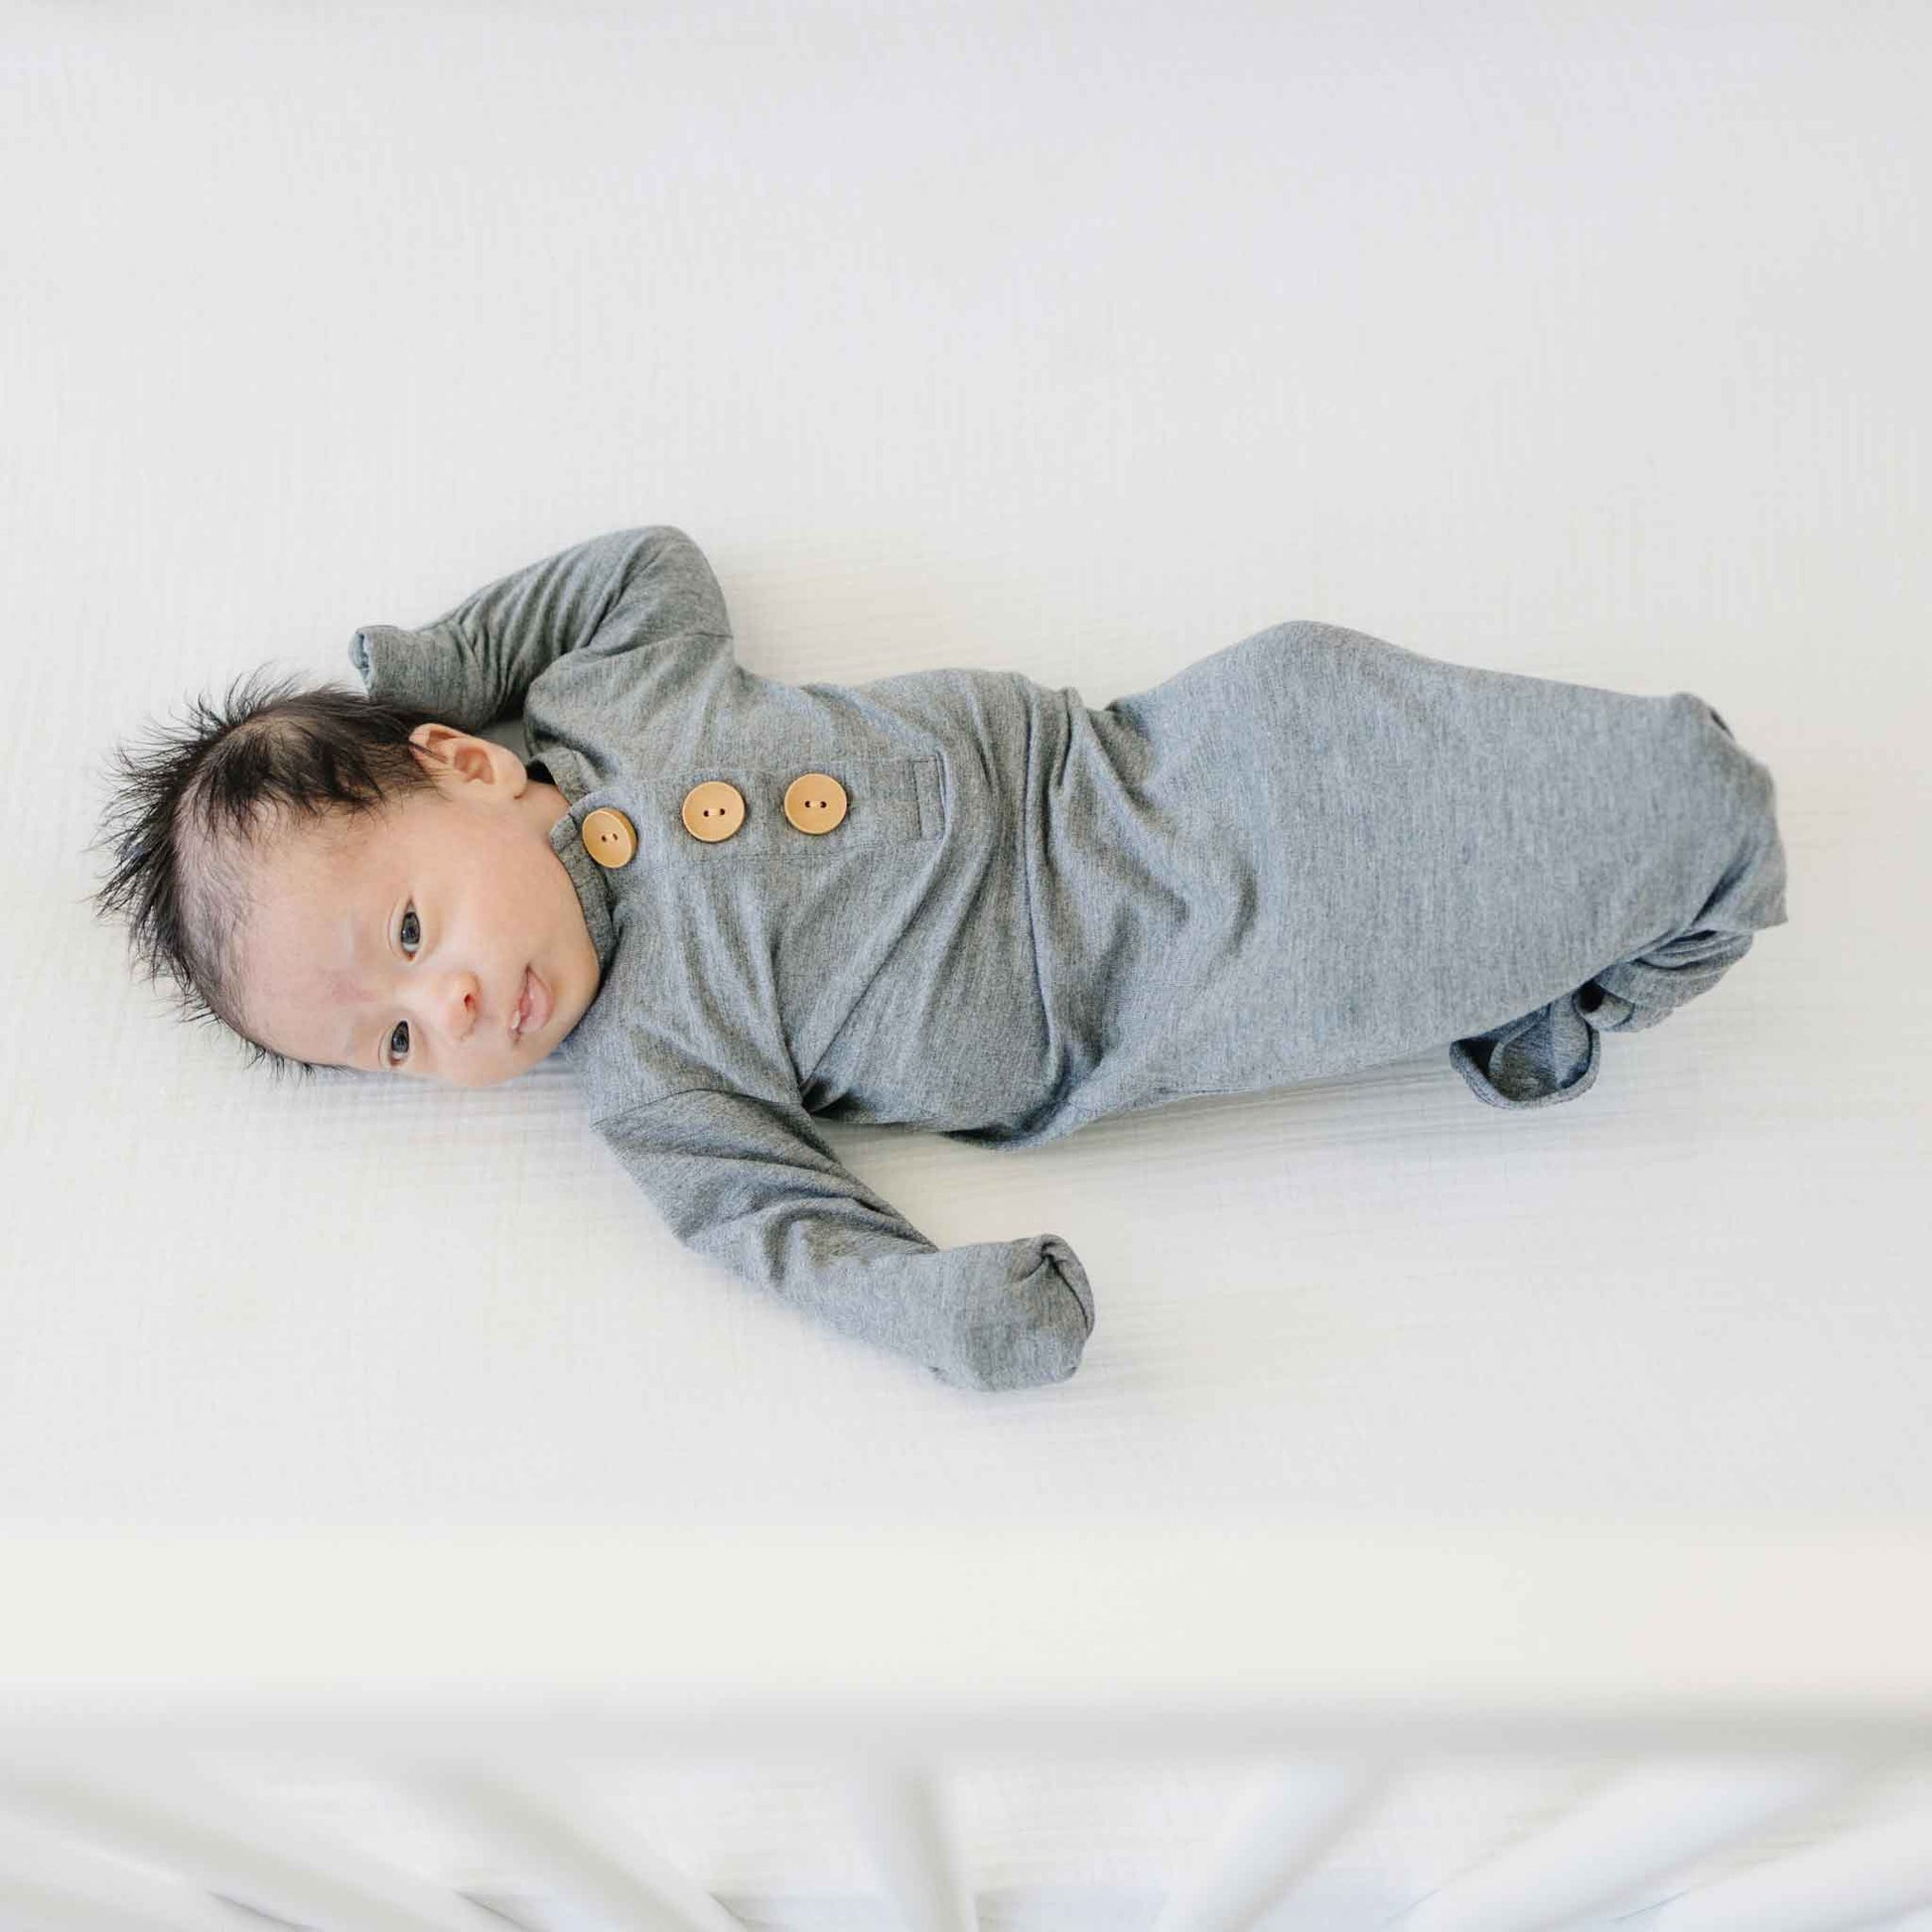 heather grey baby gown, knotted infant gown, unisex baby gown, hospital coming home outfit